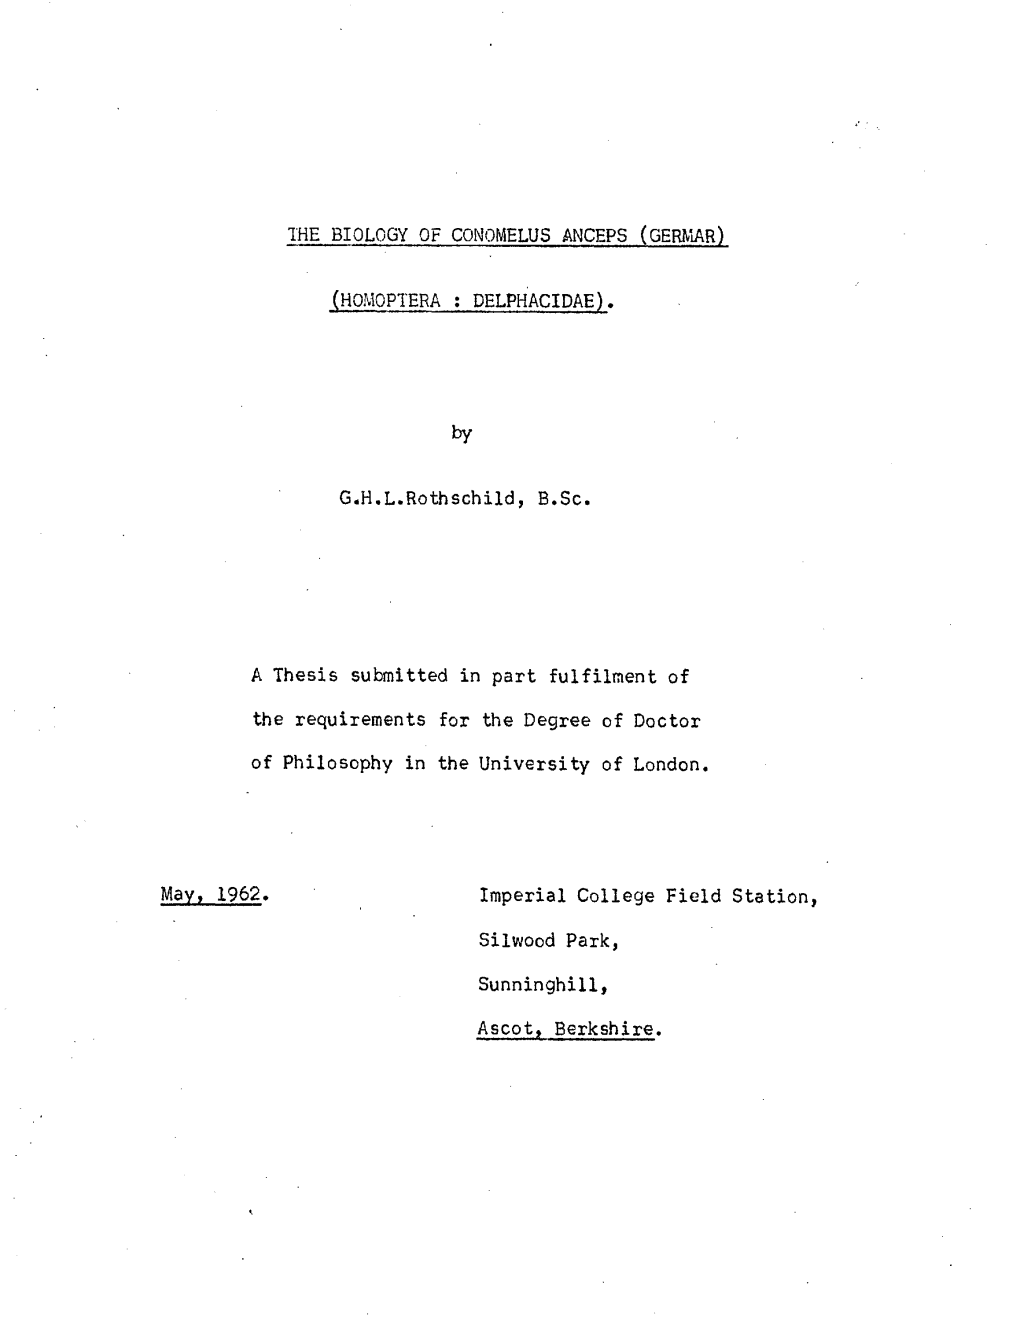 THE BIOLOGY of CONOMELUS ANCEPS (GERMAR) (HOMOPIERA : DELPHACIDAE). by G.H.L.Rothschild, B.Sc. a Thesis Submitted in Part Fulfi